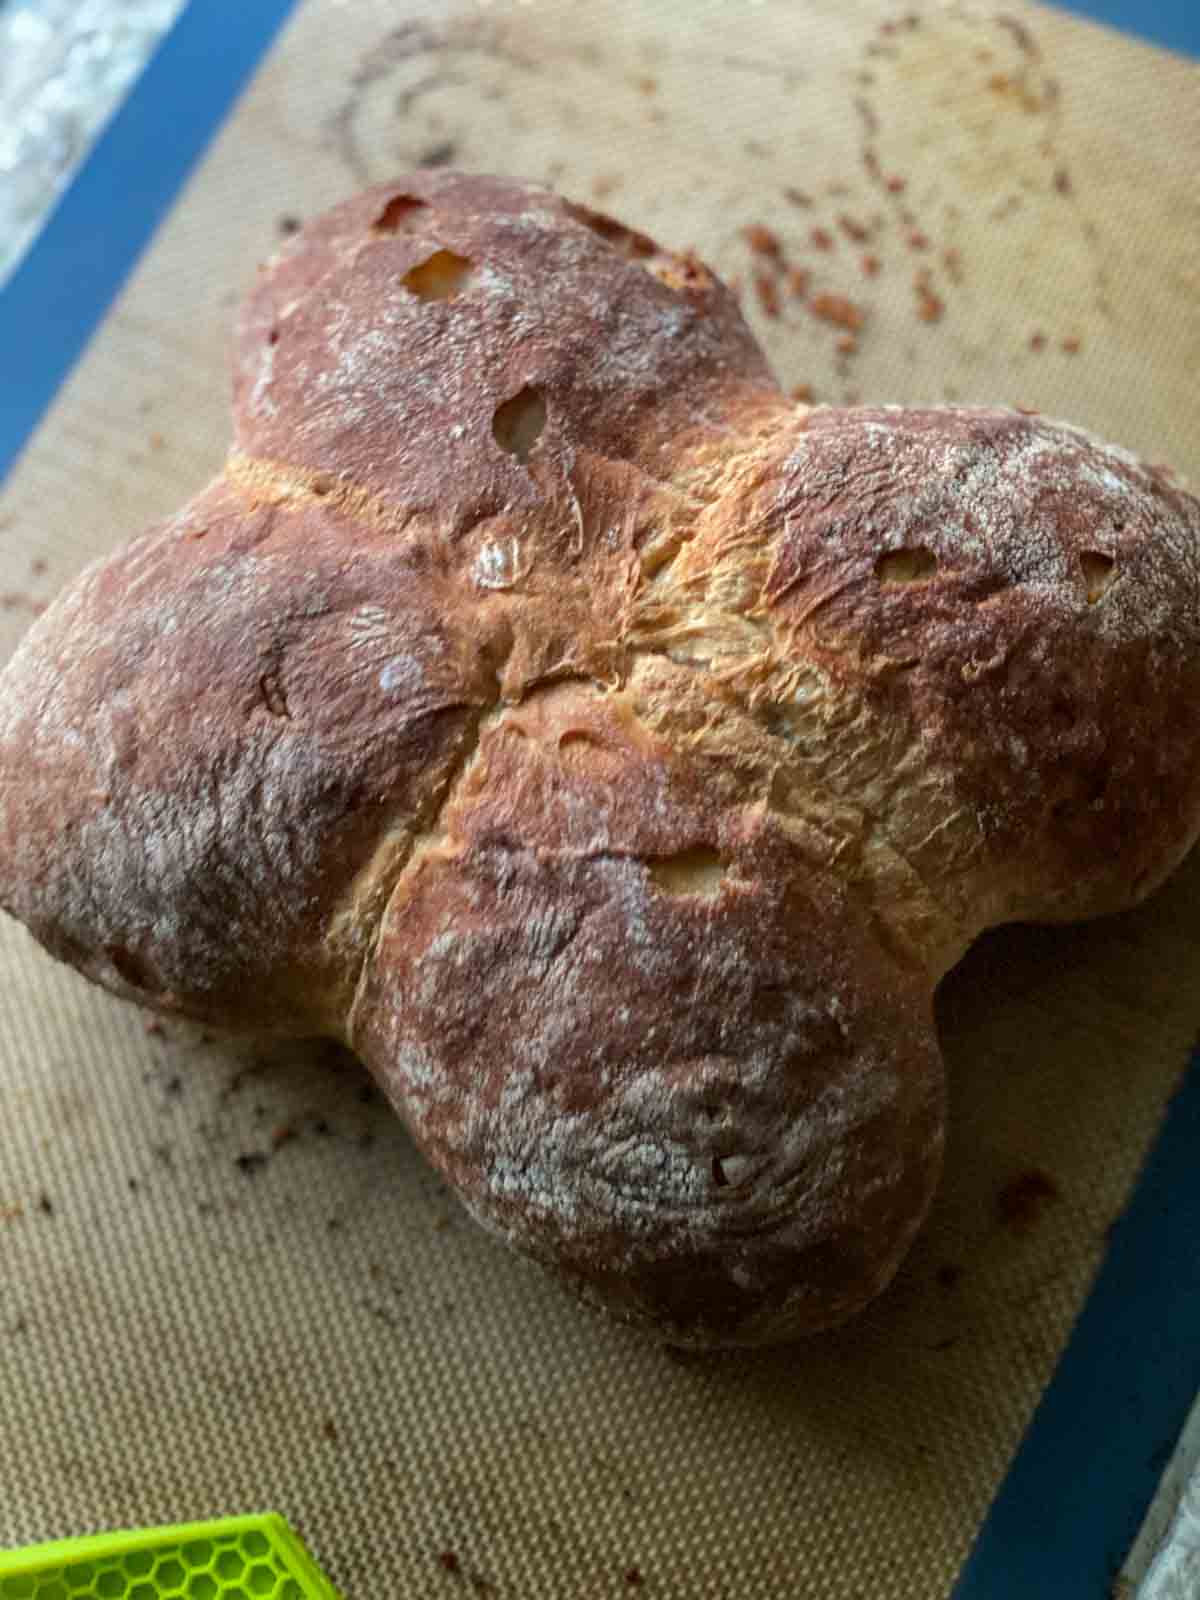 german bread from the brot box on baking sheet